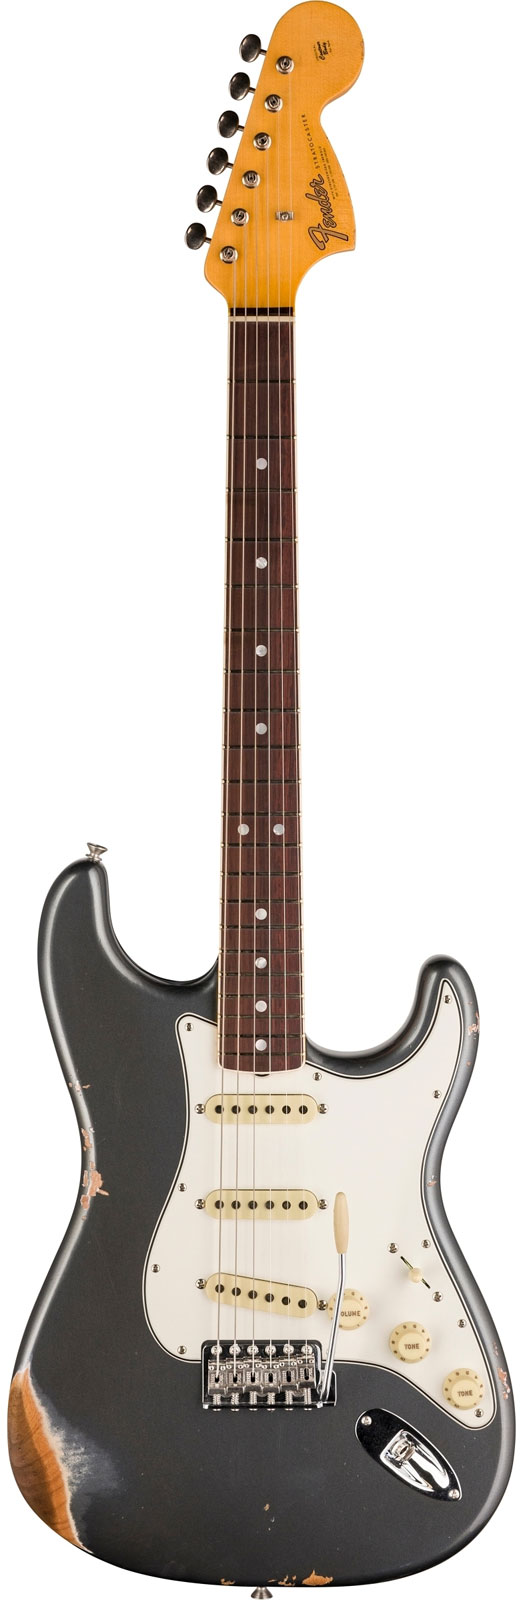 FENDER CUSTOM SHOP STRATOCASTER CS TIME MACHINE '67 - RELIC , AGED CHARCOAL FROST METALLIC